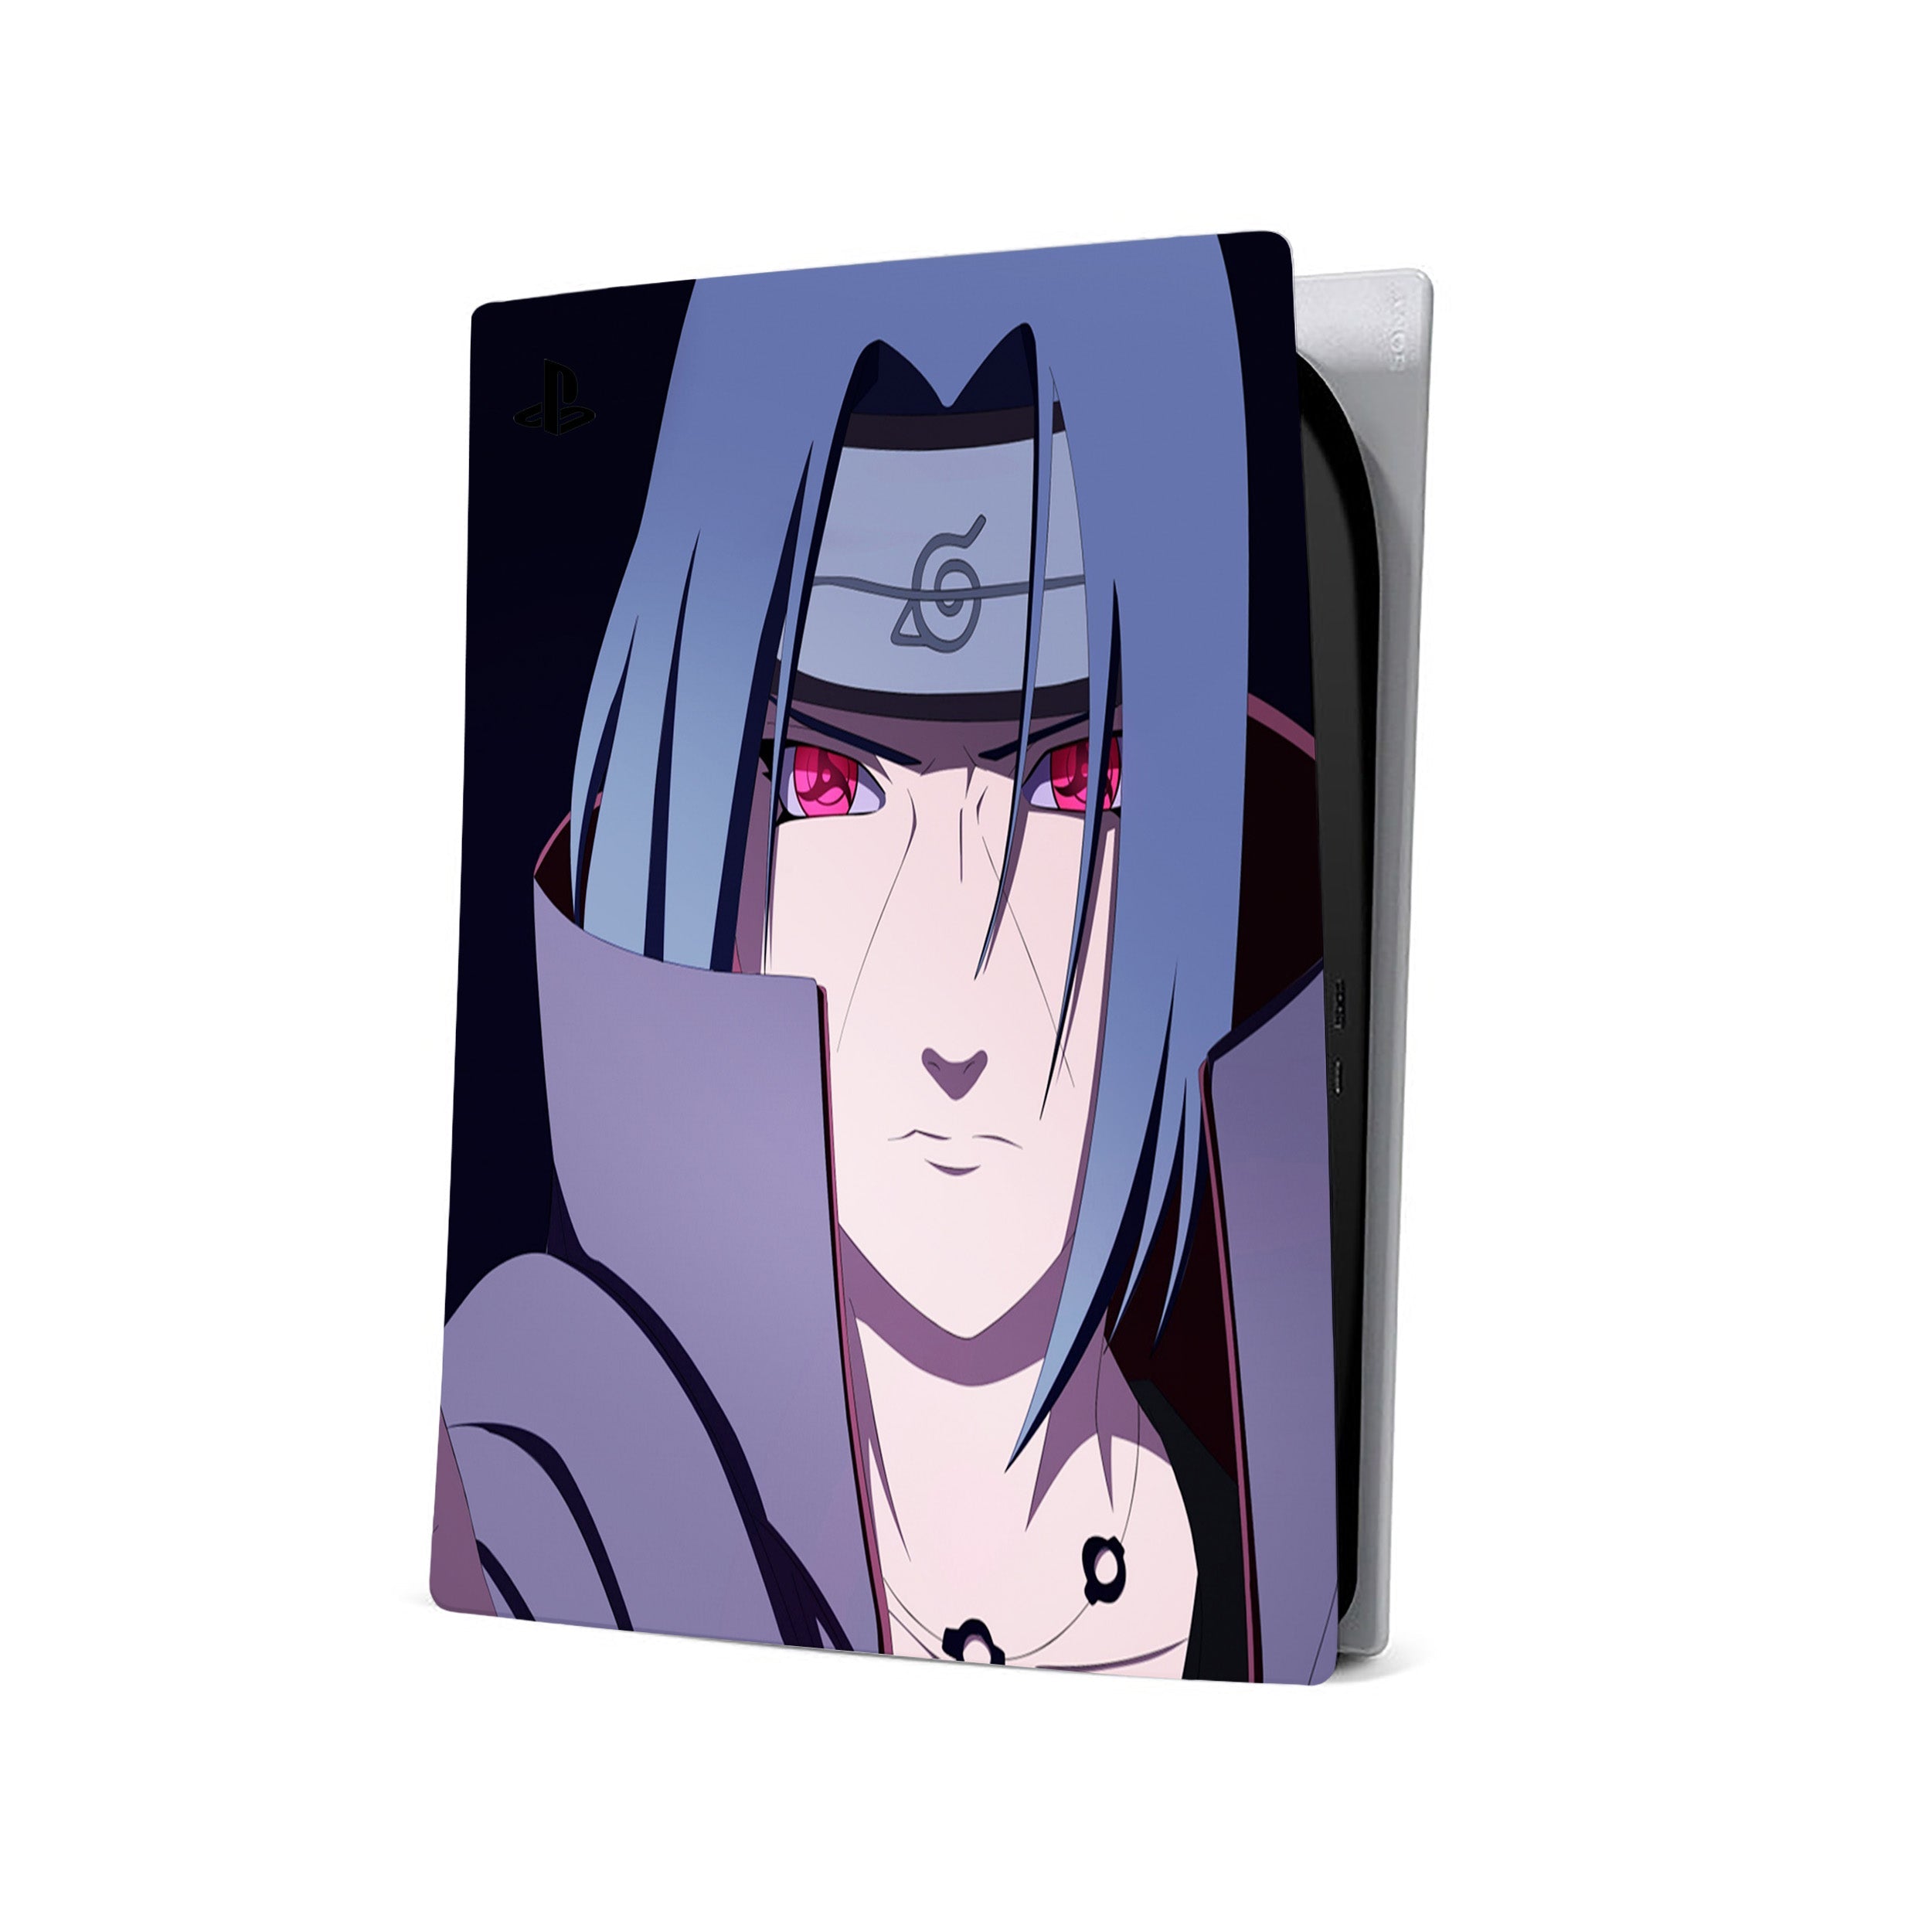 A video game skin featuring a Naruto Itachi design for the PS5.